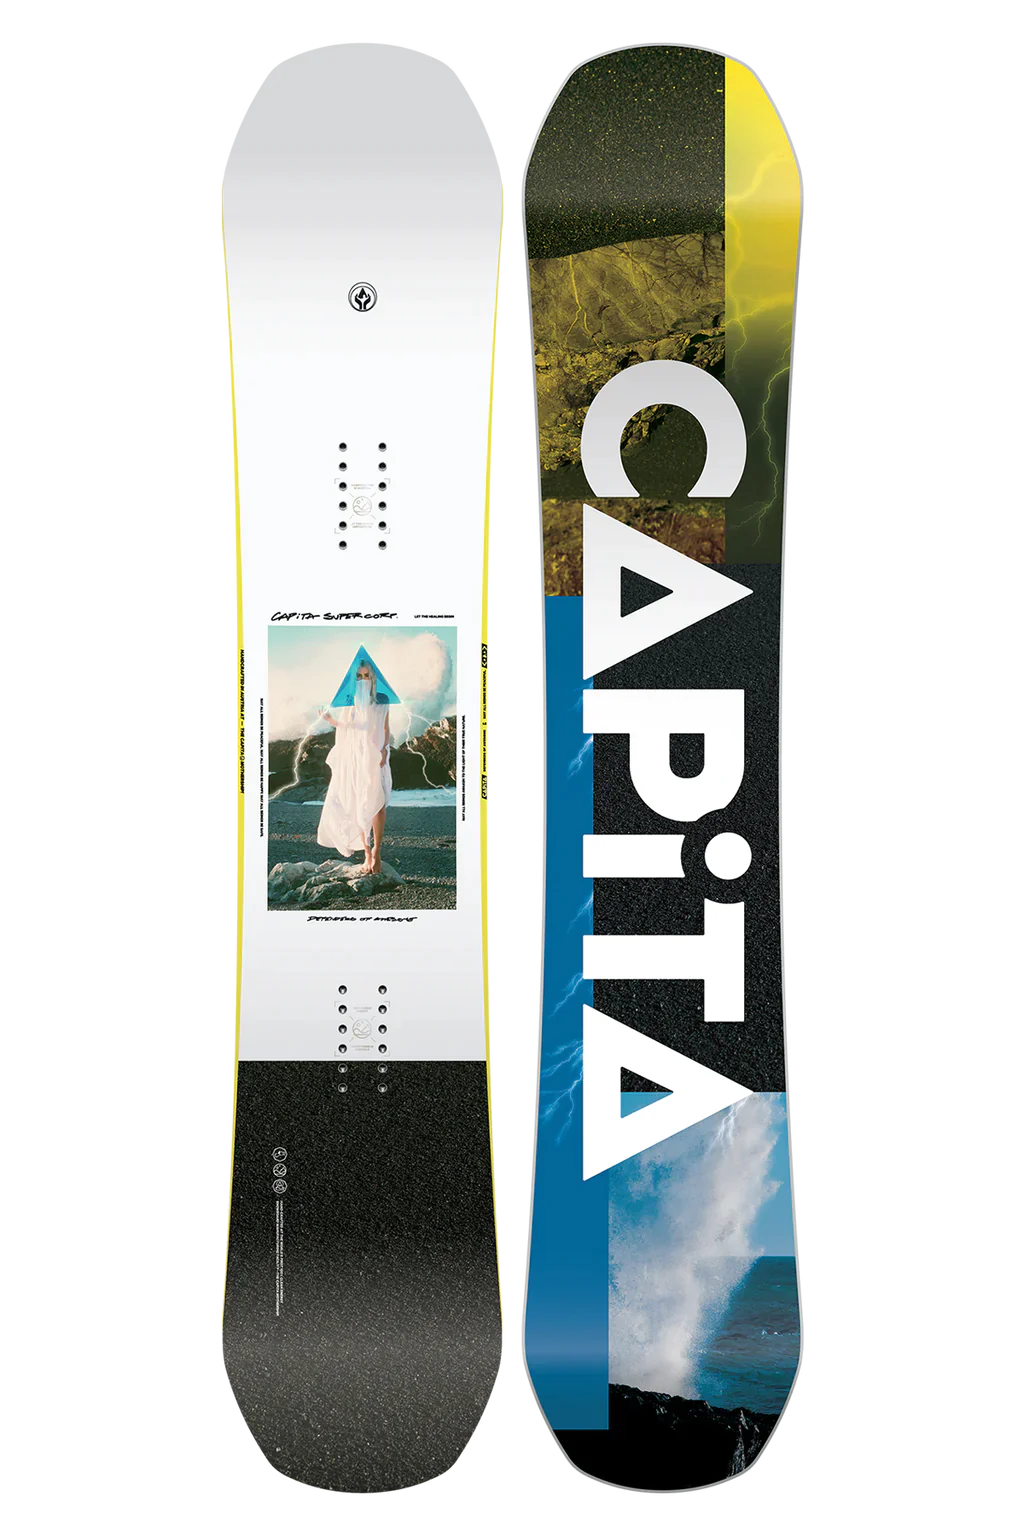 Capita Defenders of Awesome Snowboard - 2024